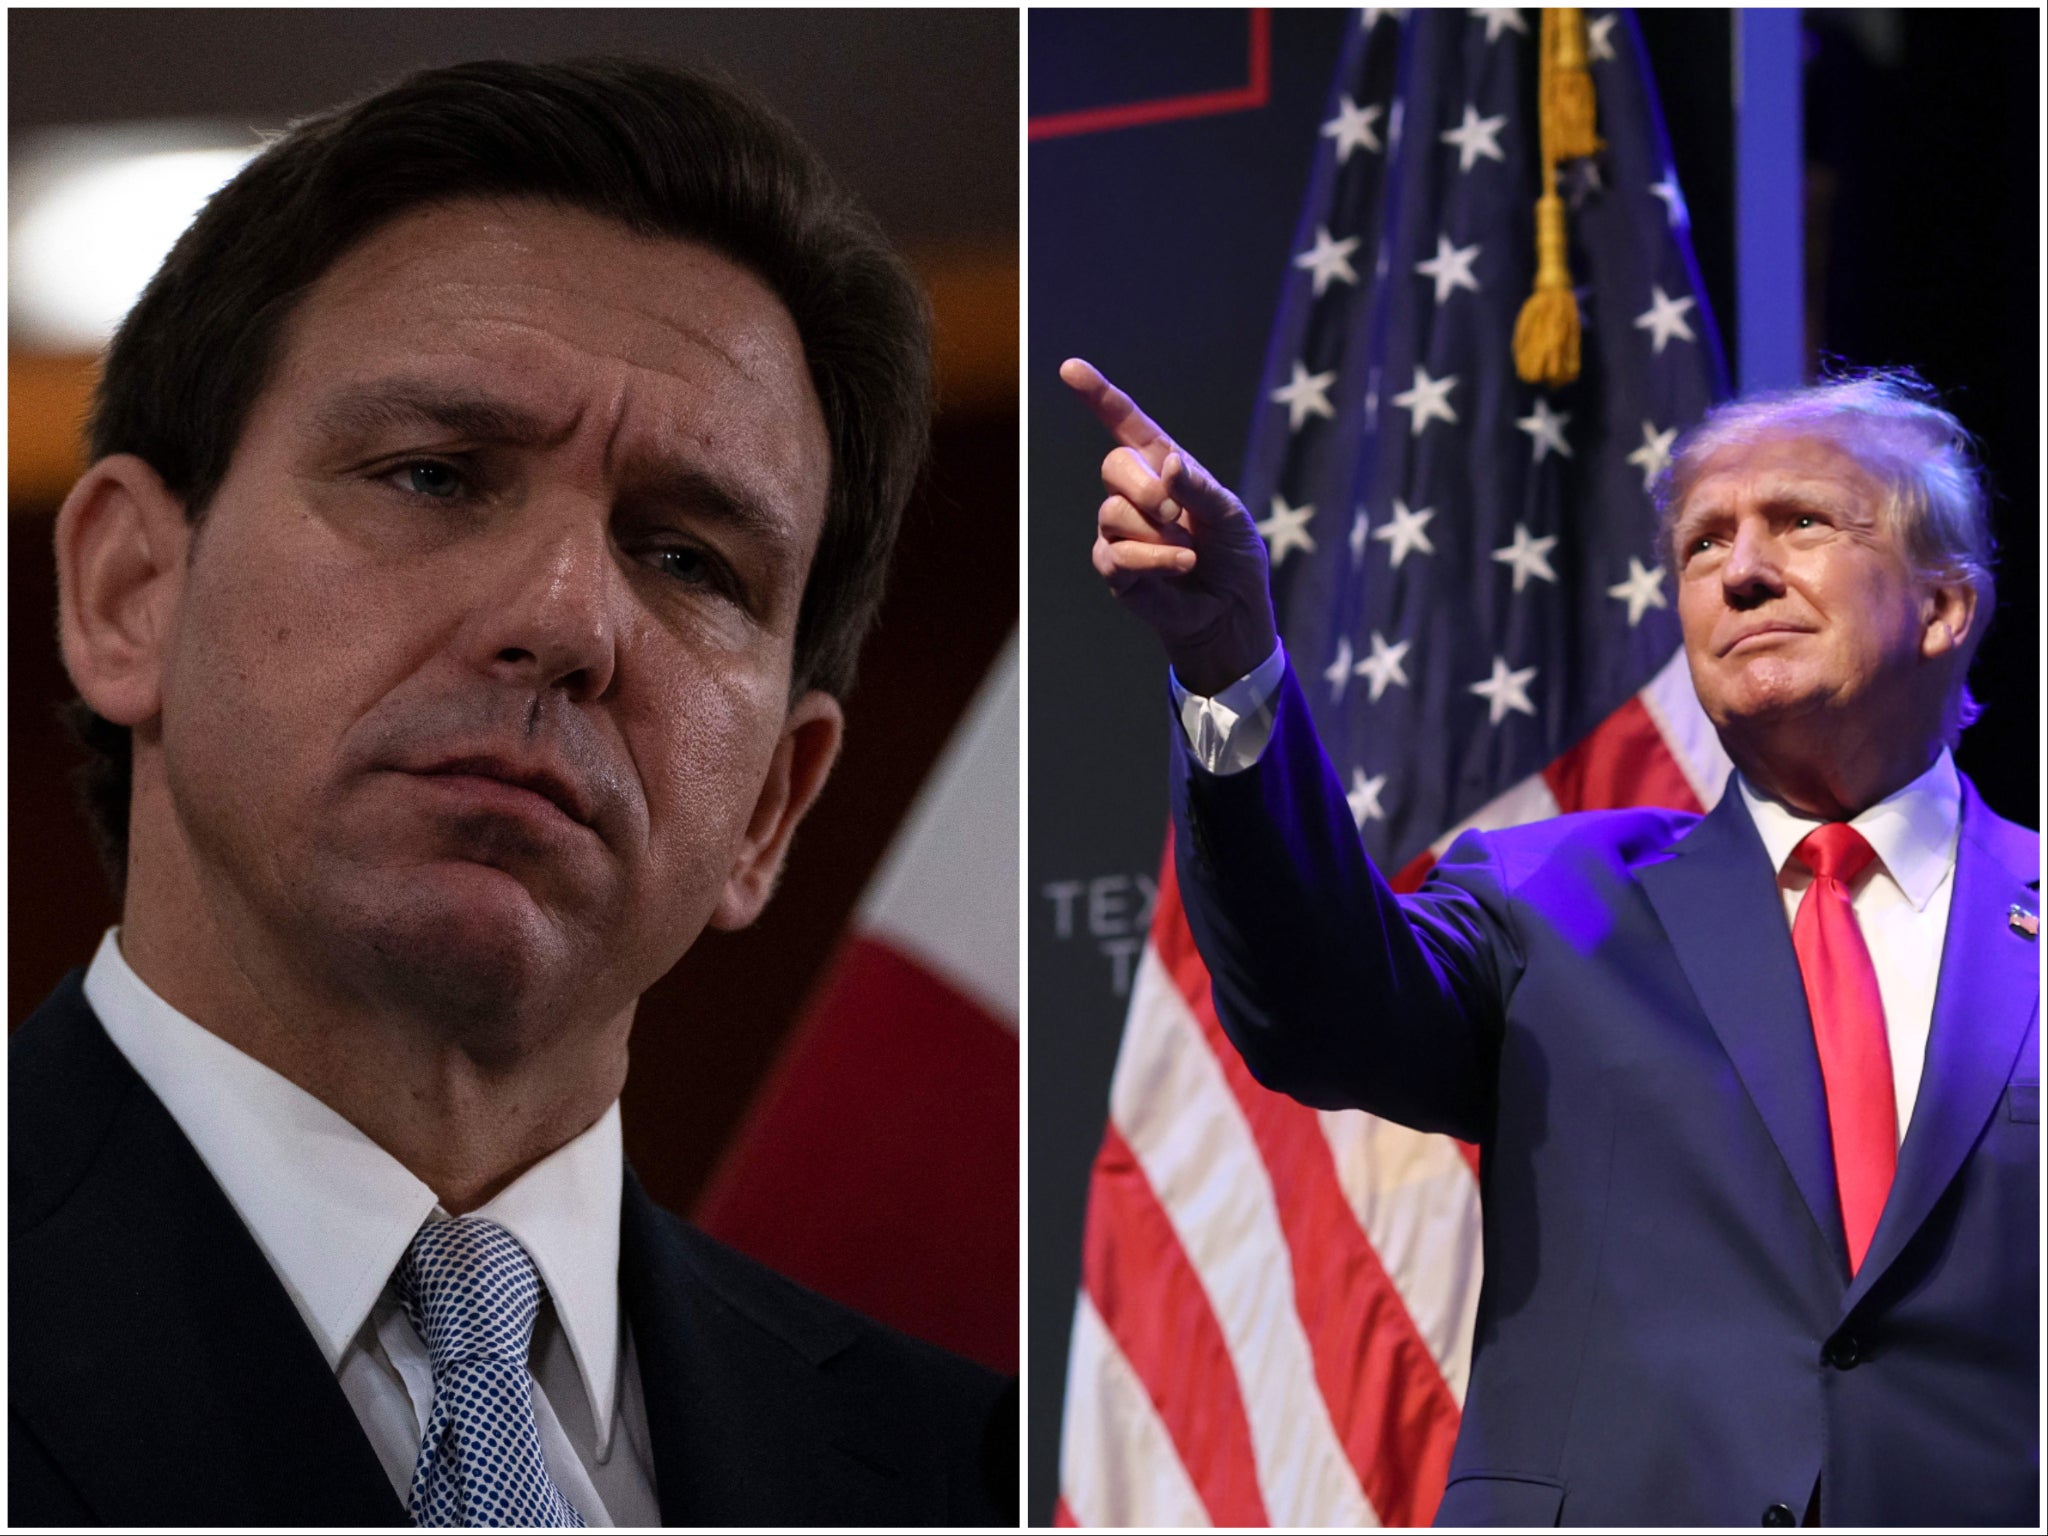 DeSantis and Trump are likely heading into a 2024 matchup